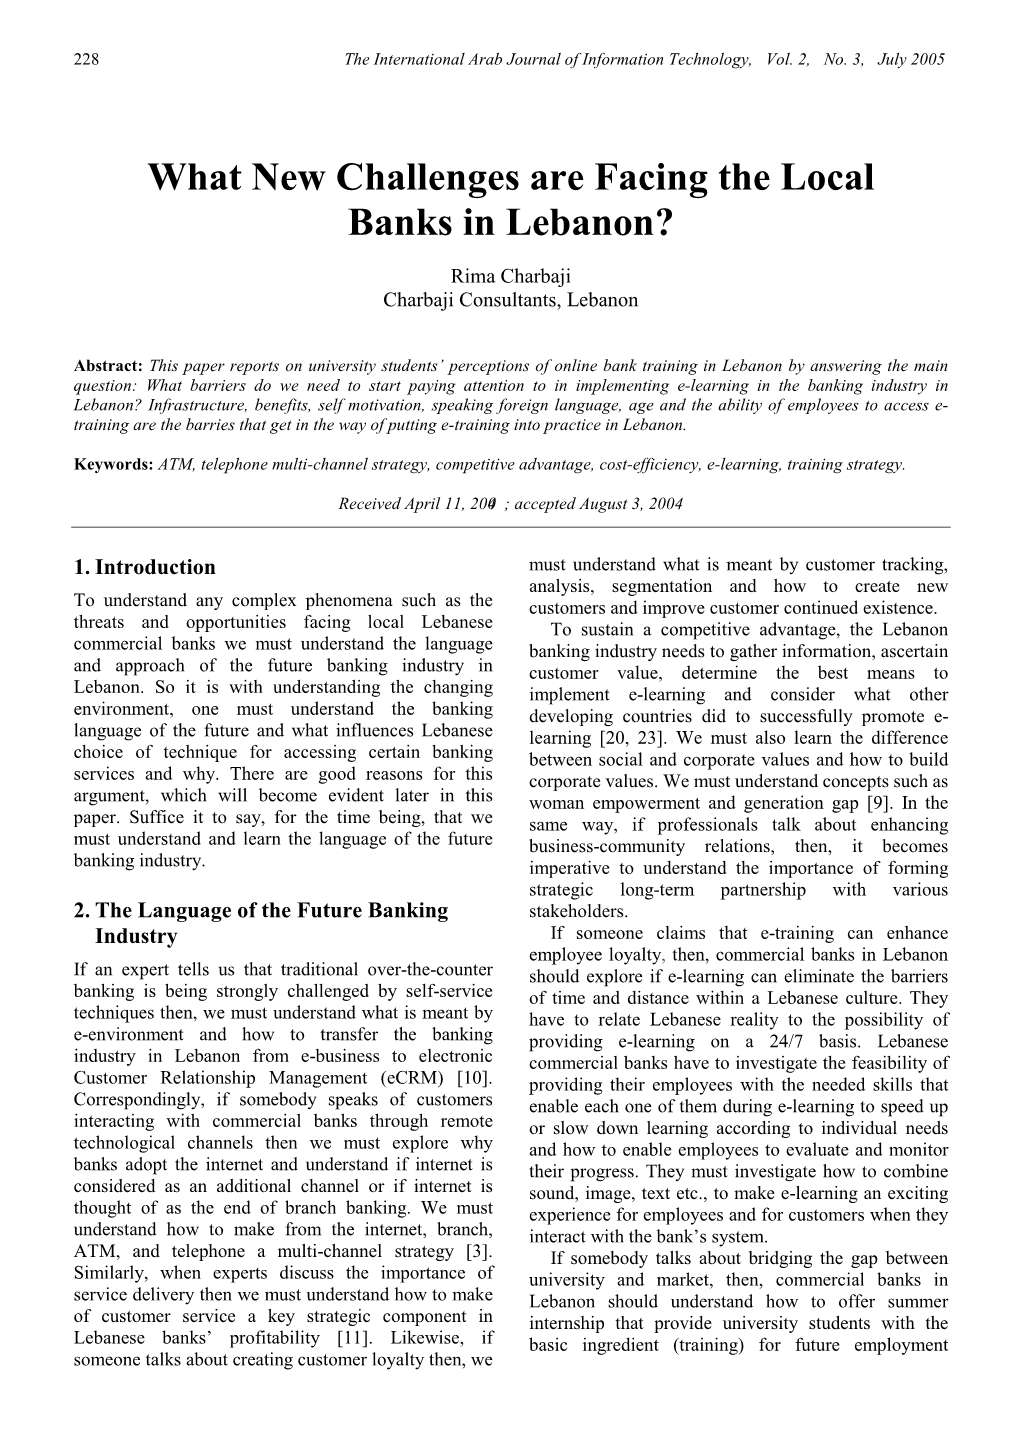 What New Challenges Are Facing the Local Banks in Lebanon?